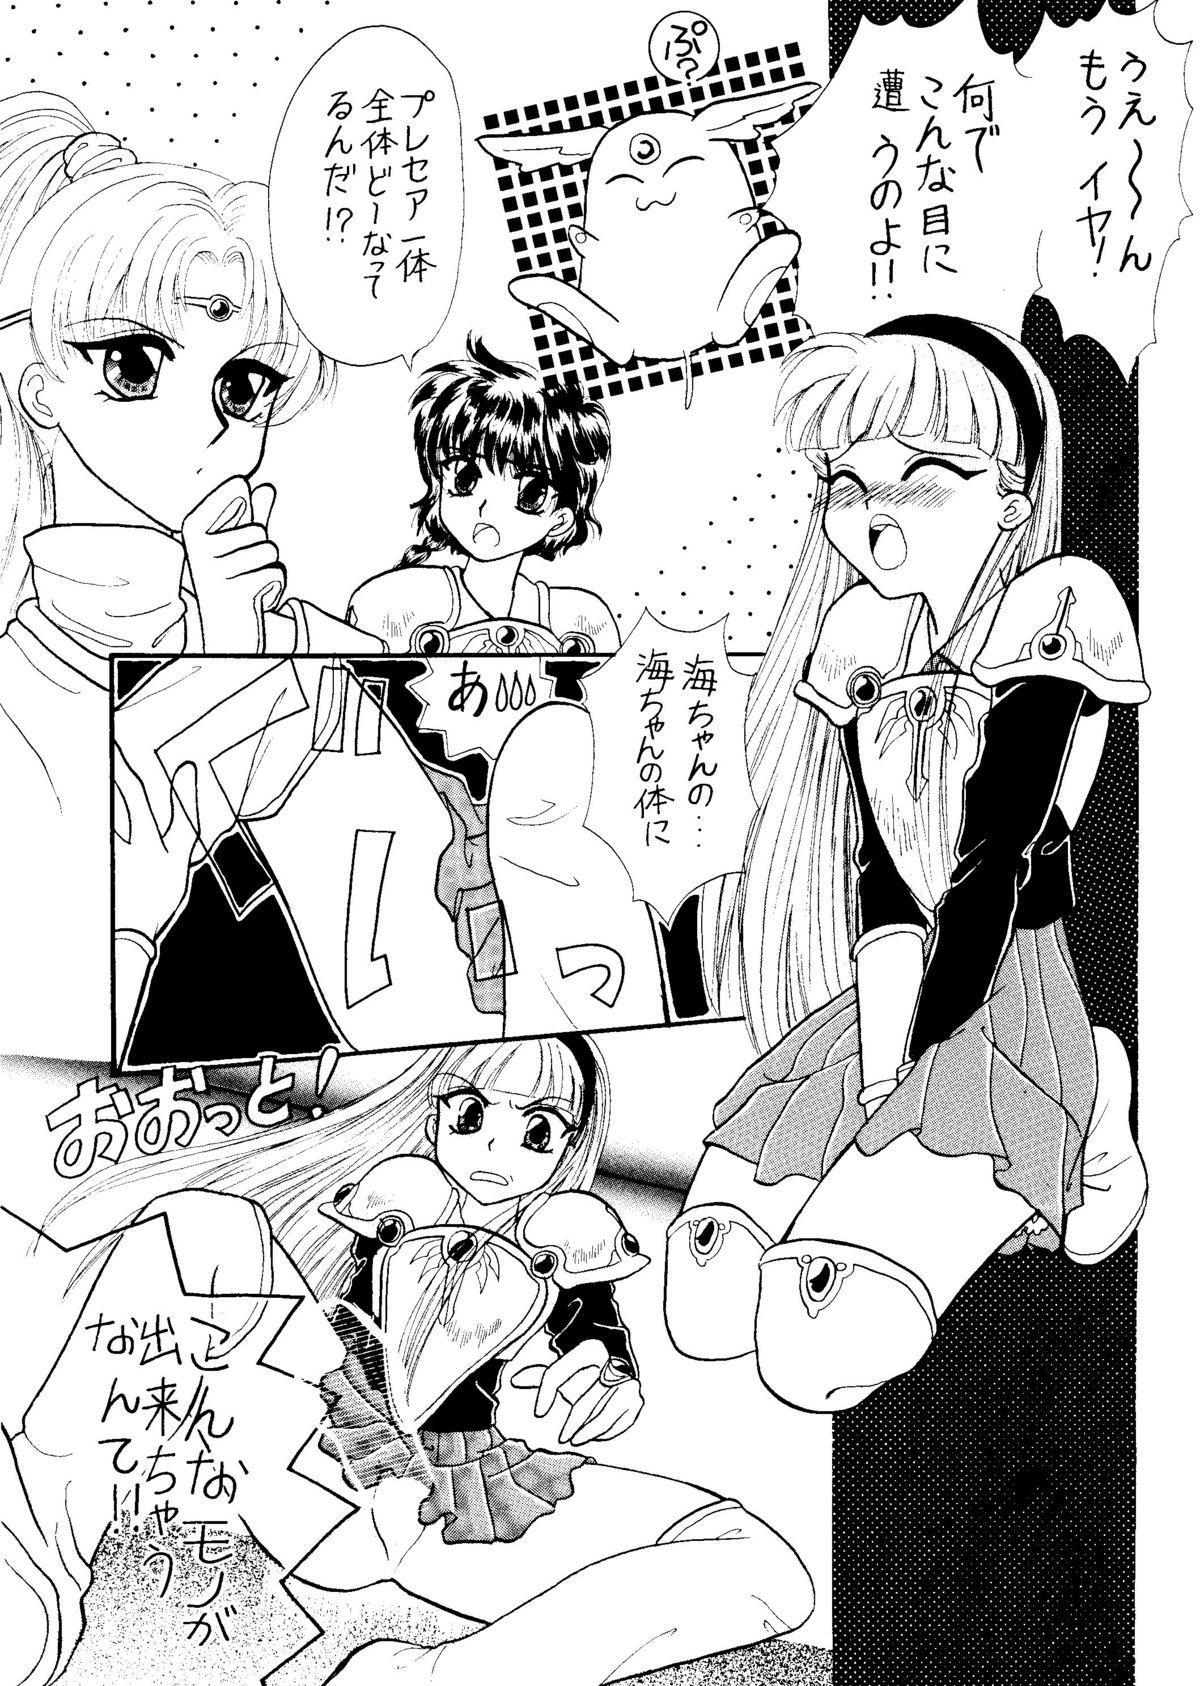 4some Motel - Magic knight rayearth Young Tits - Page 7